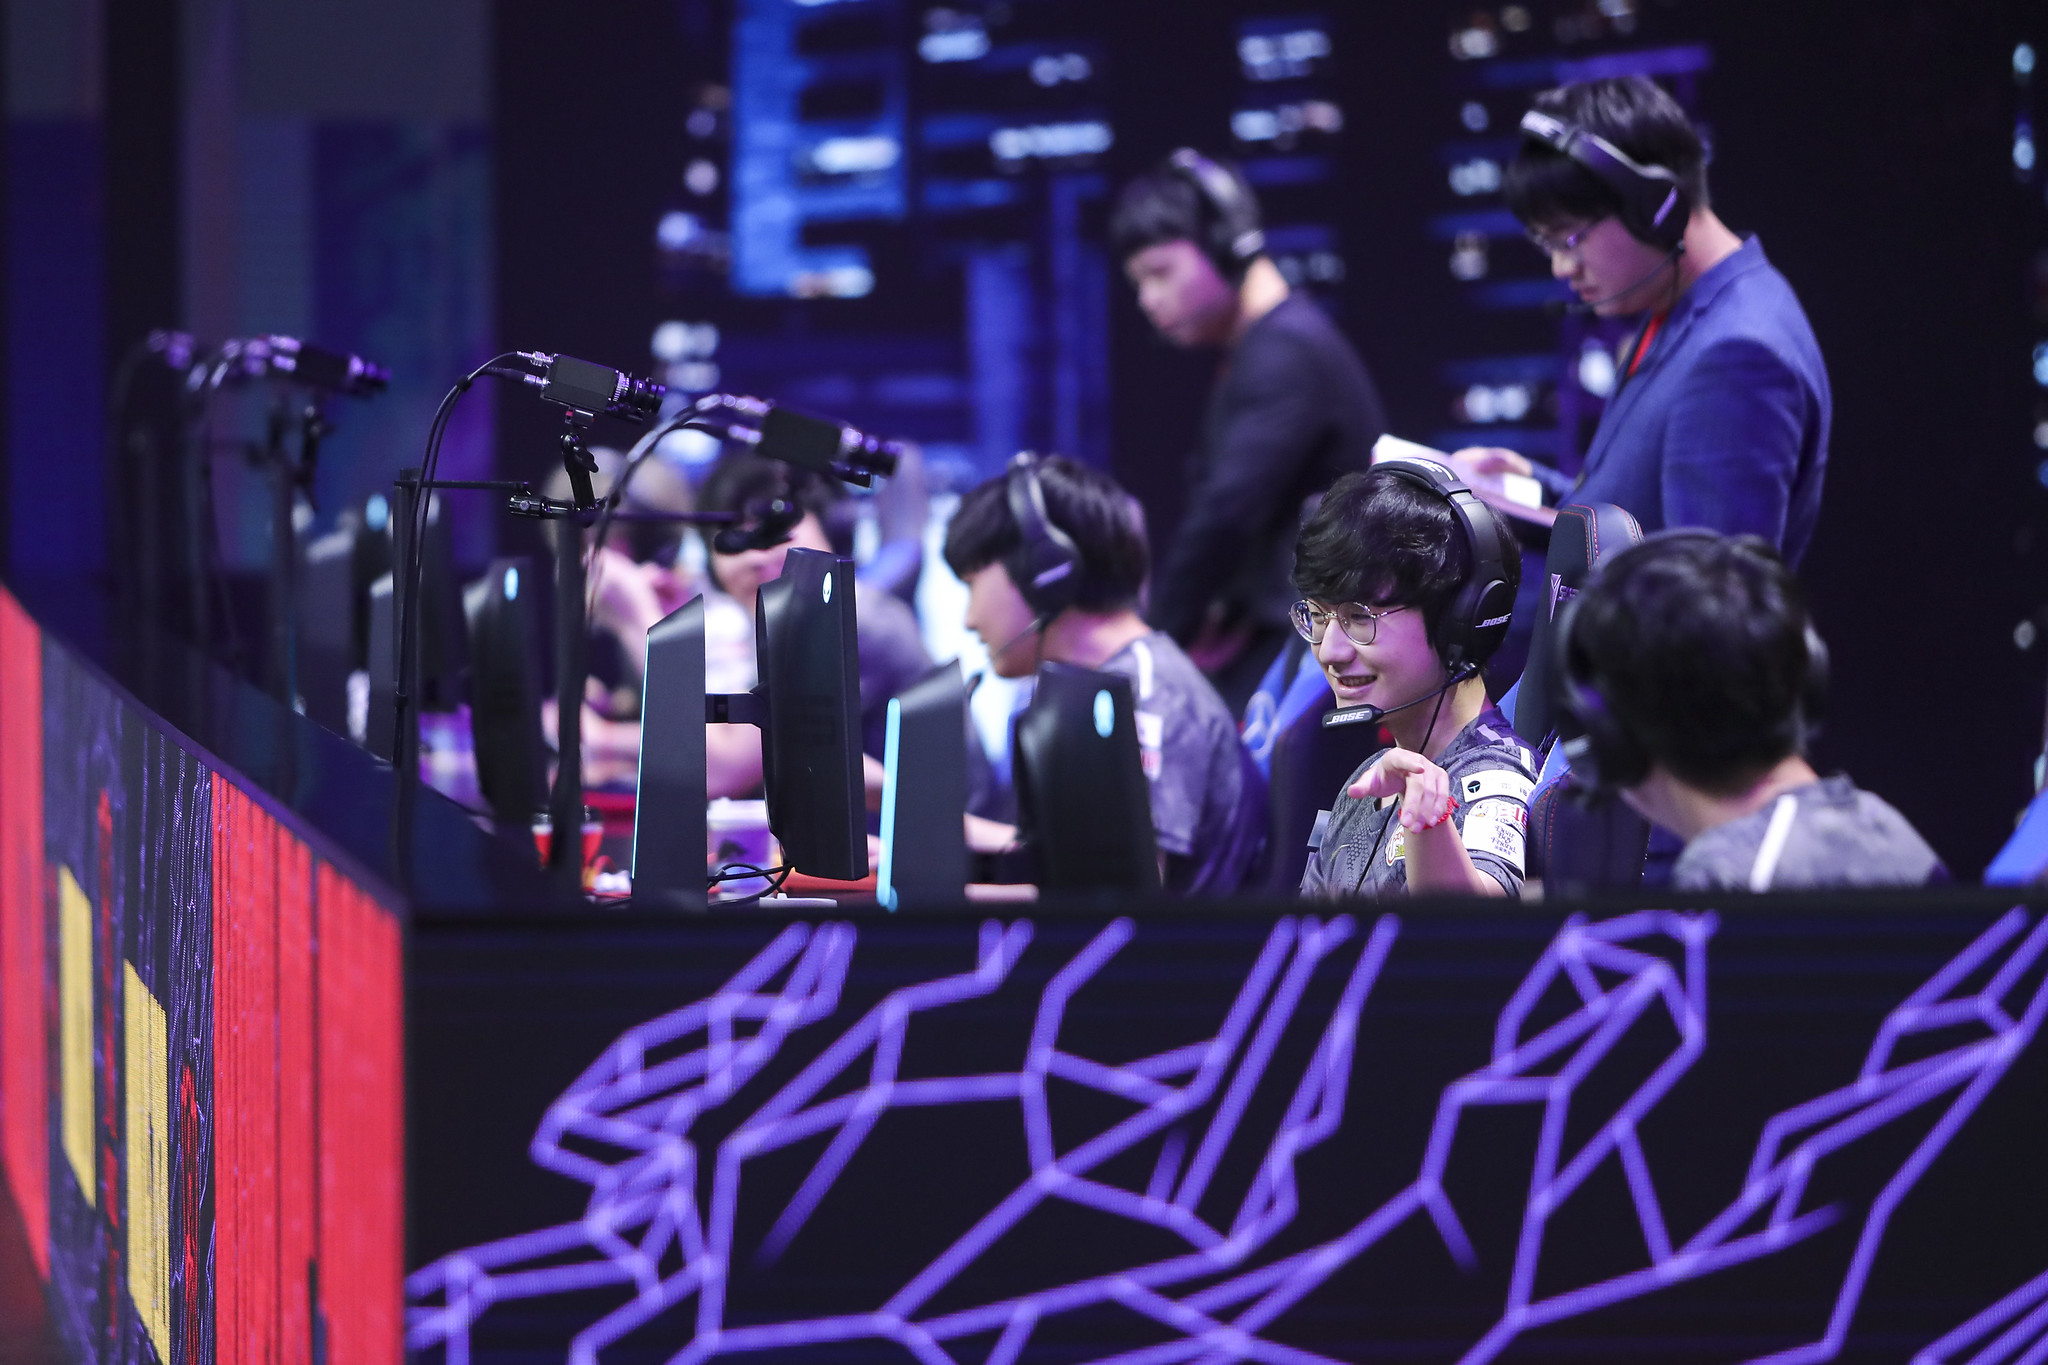 A Small History On Peanut, LPL’s Fourth Seed Worlds Seed – Current LGD Gaming And Former SKT Jungler